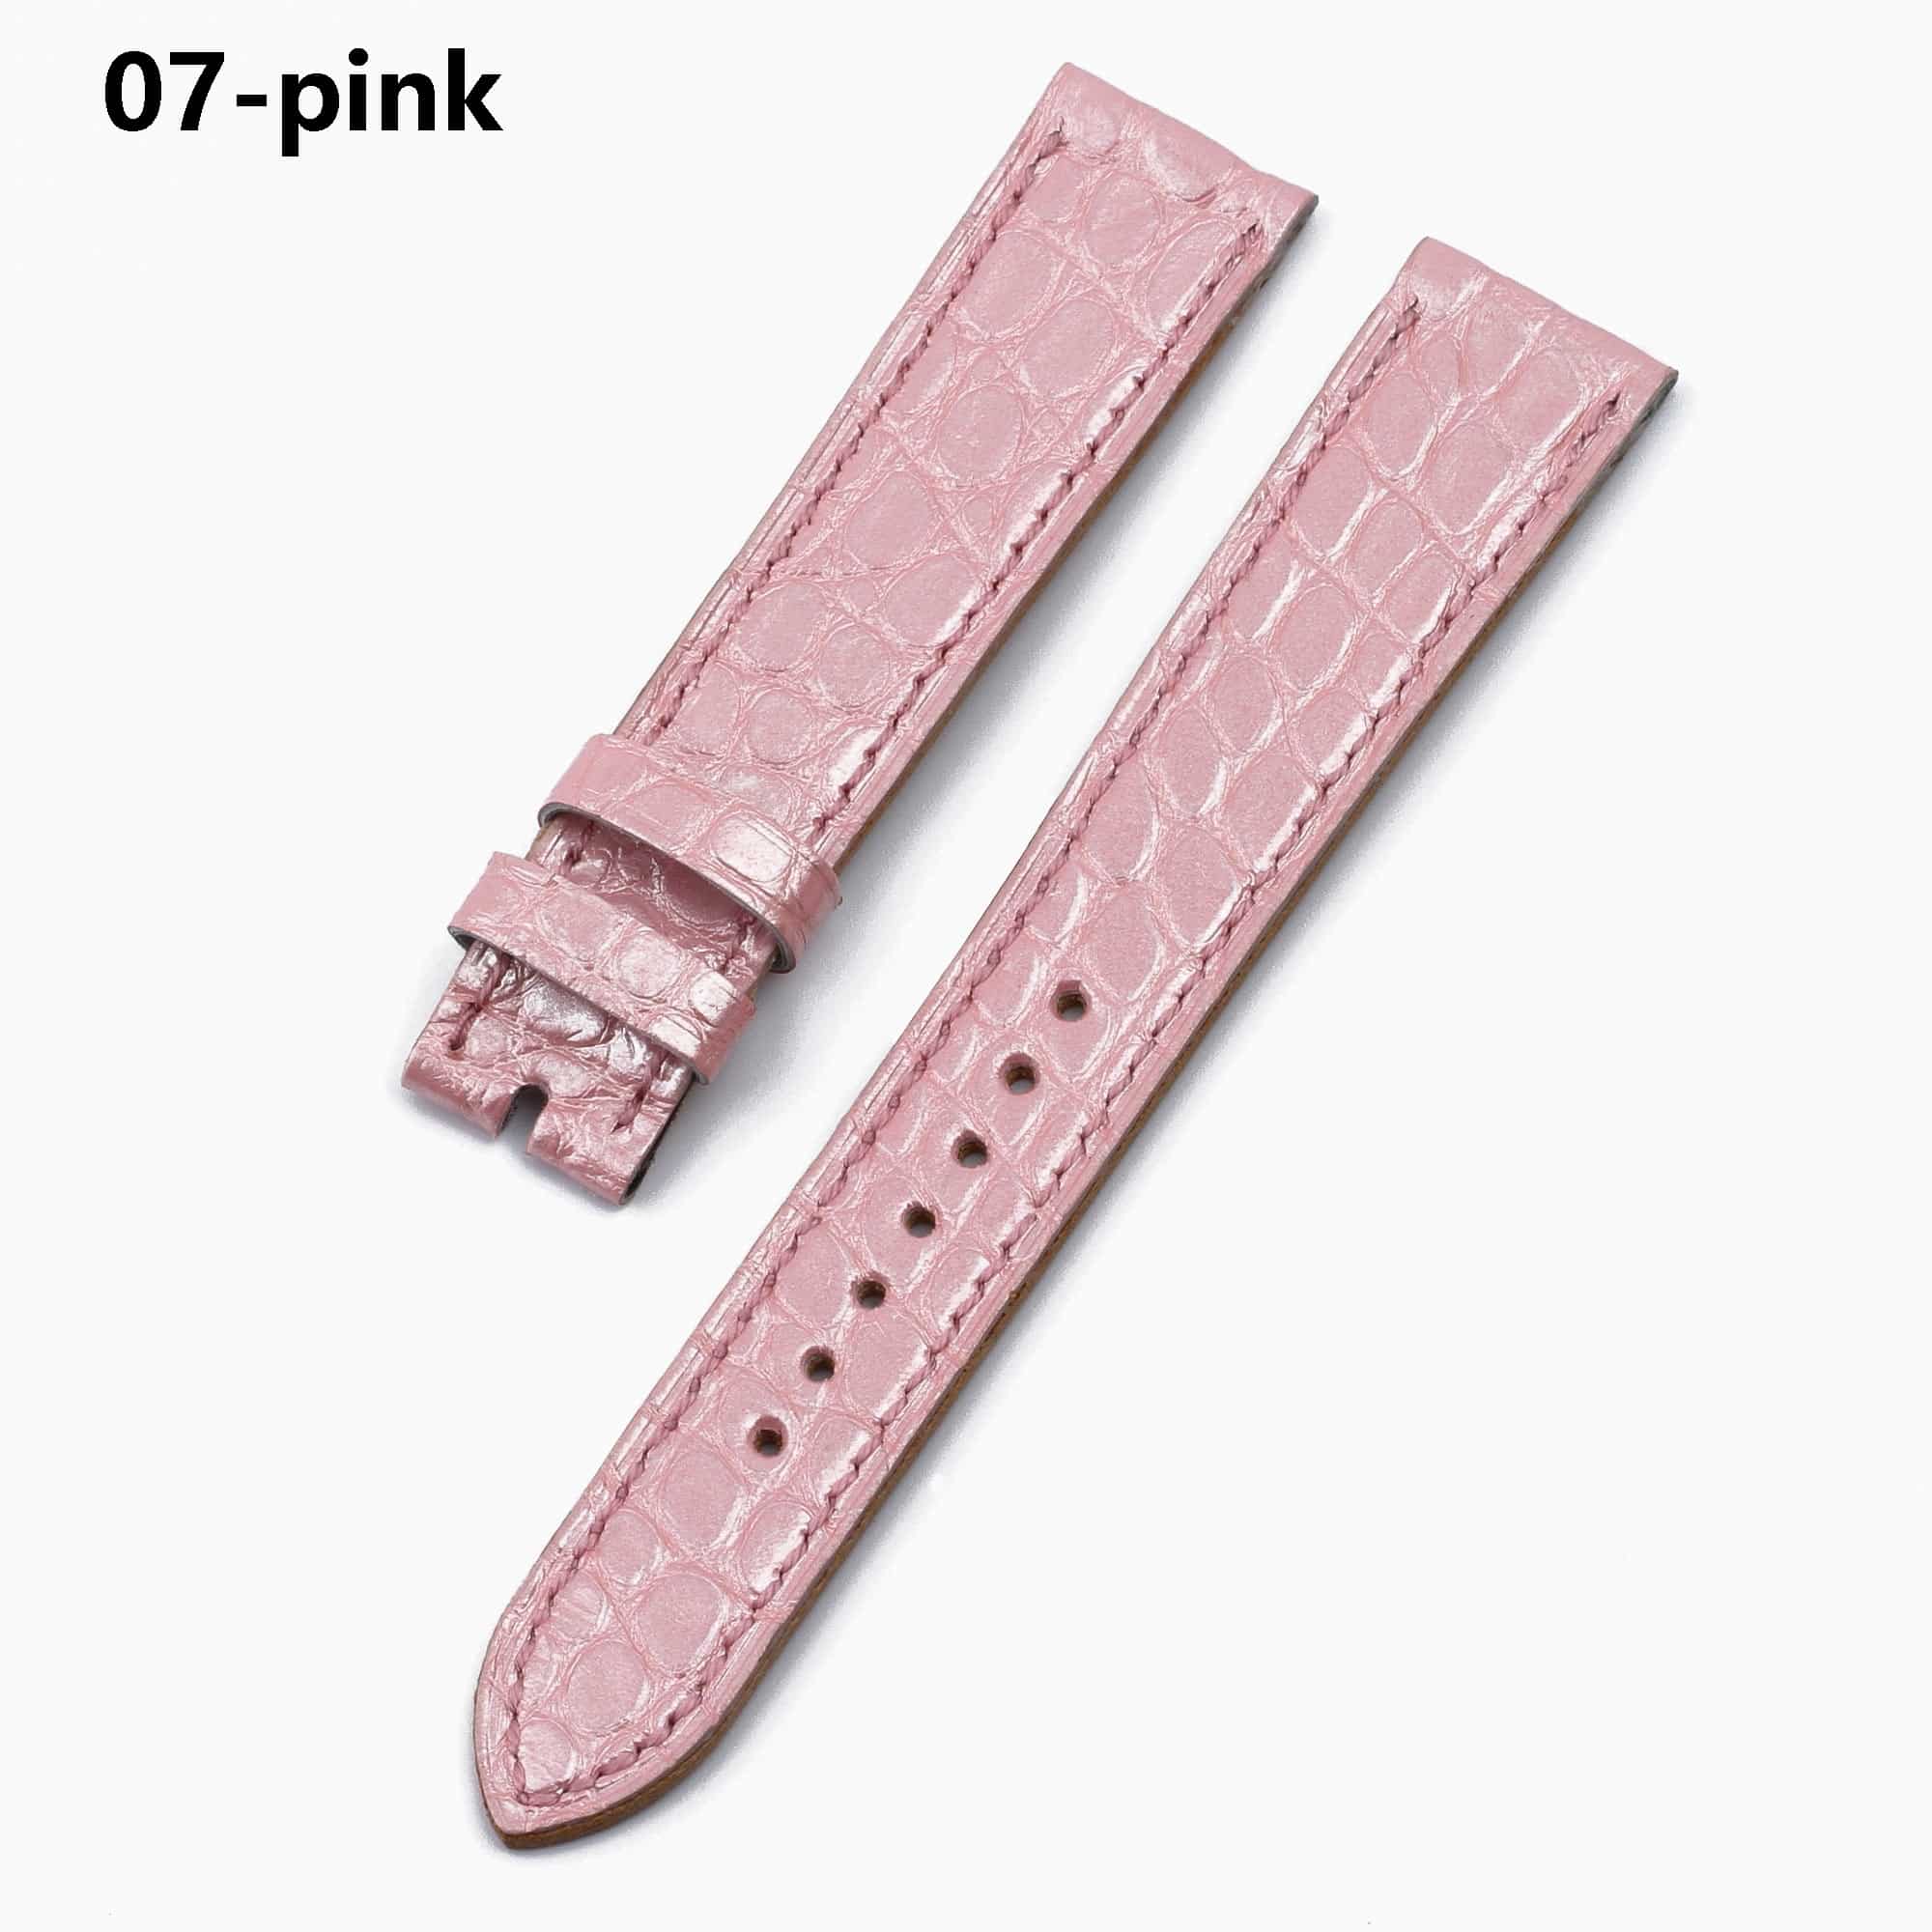 Alligator Hermes leather strap replacement Heure H single tour pink watch band